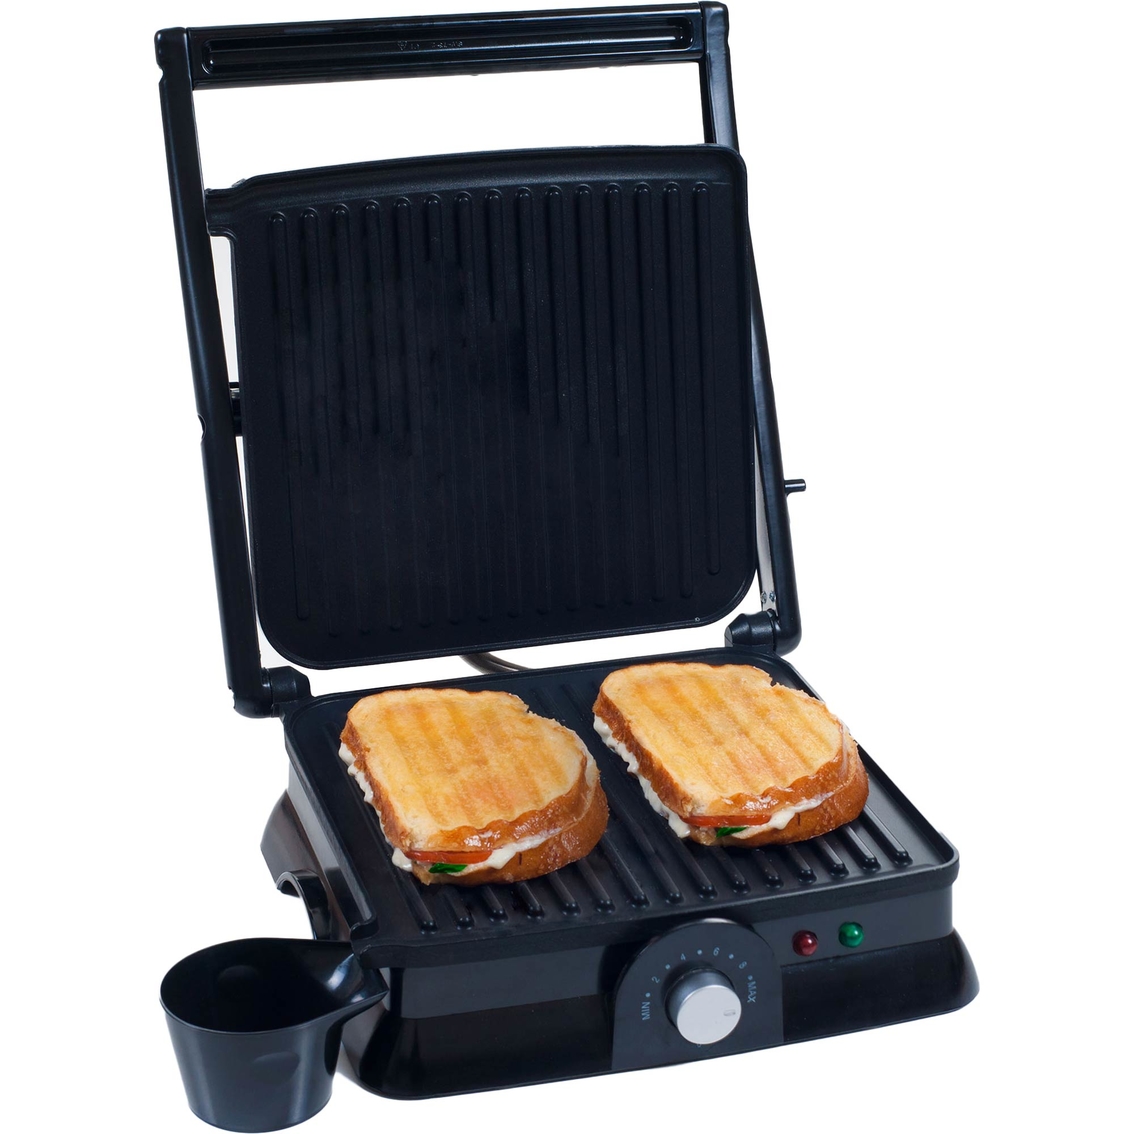 Chef Buddy Electric Panini Press Indoor Grill and Gourmet Sandwich Maker - Image 3 of 3